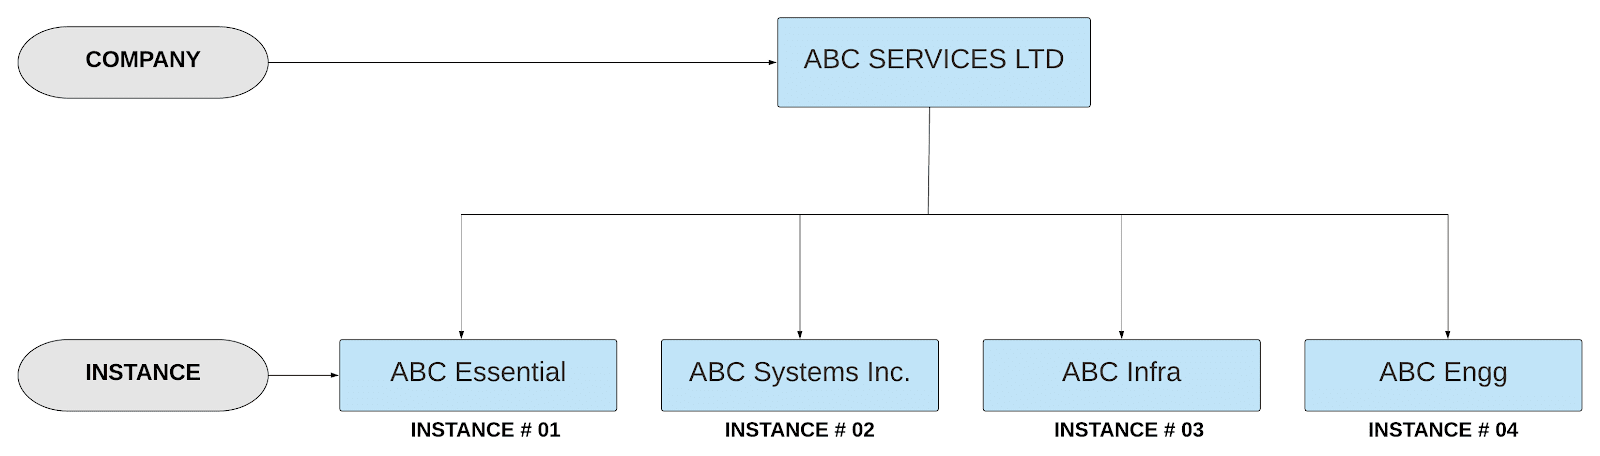 UDM Company and Instance.png